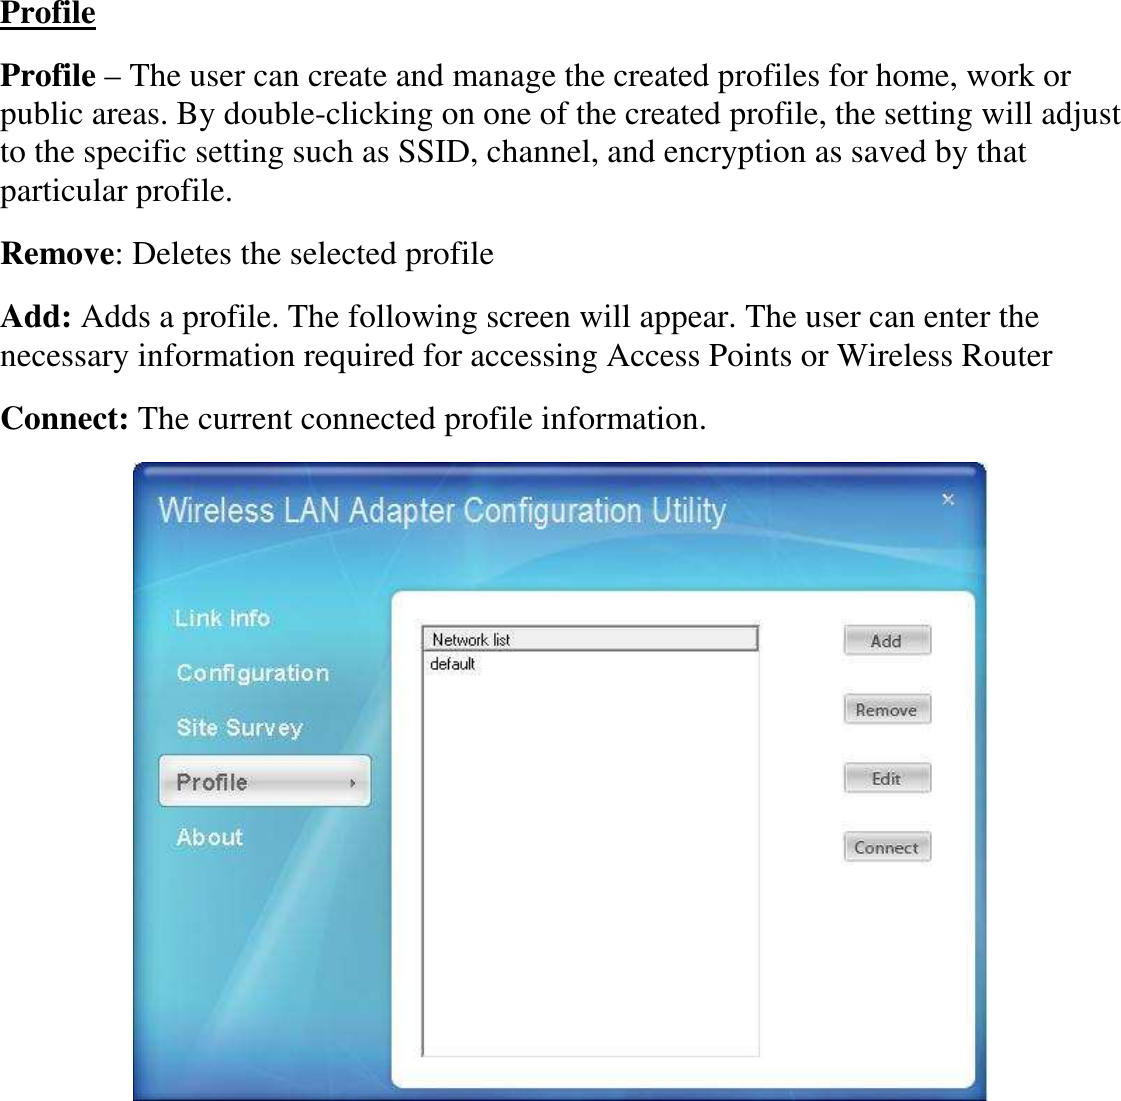  Profile Profile – The user can create and manage the created profiles for home, work or public areas. By double-clicking on one of the created profile, the setting will adjust to the specific setting such as SSID, channel, and encryption as saved by that particular profile. Remove: Deletes the selected profile Add: Adds a profile. The following screen will appear. The user can enter the necessary information required for accessing Access Points or Wireless Router Connect: The current connected profile information.   